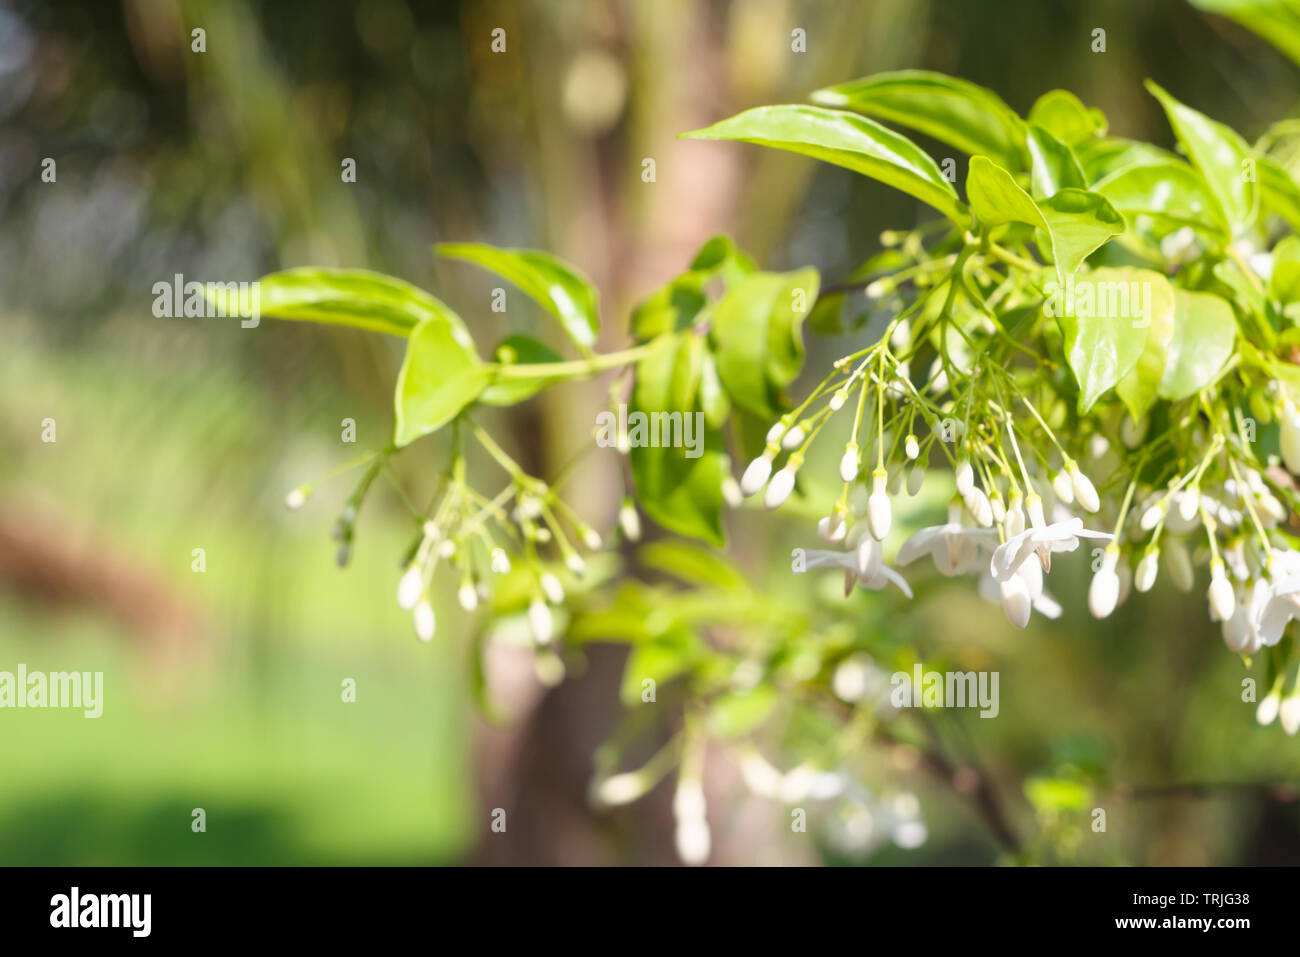 Wrightia religiosa Benth or Mok flowers background with sunlight and blurred. Stock Photo